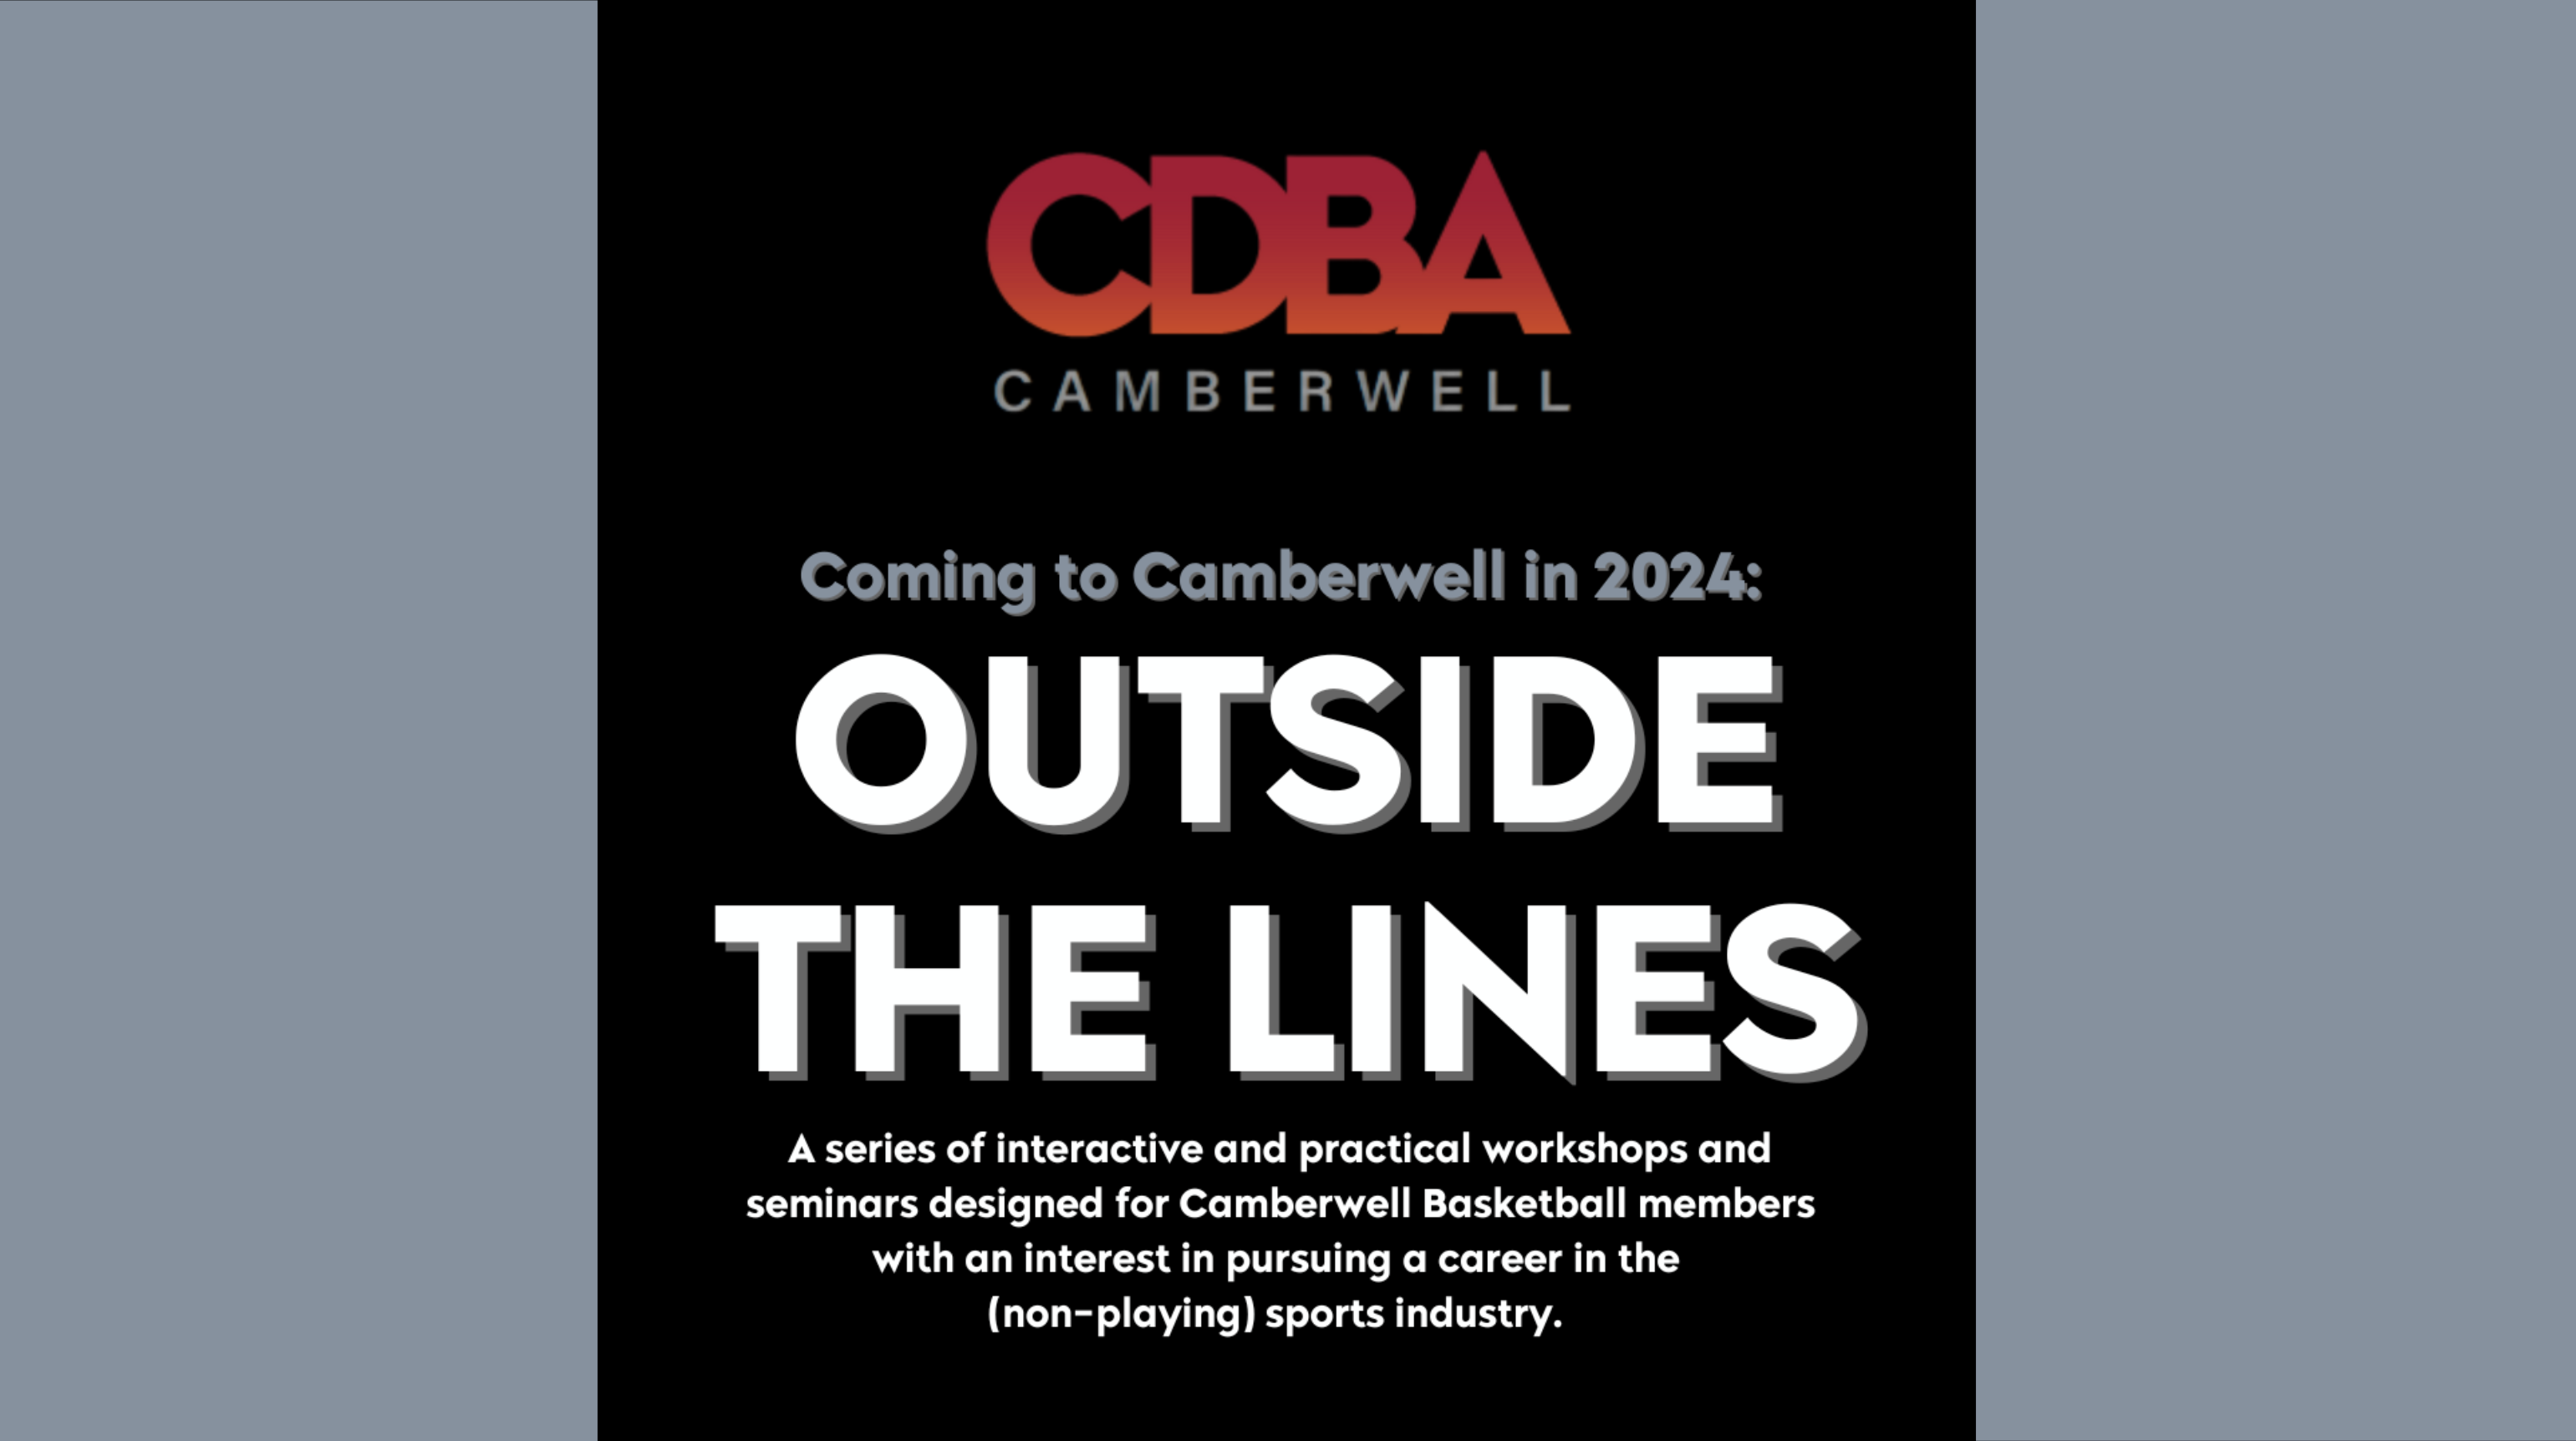 CDBA launches Outside the Lines